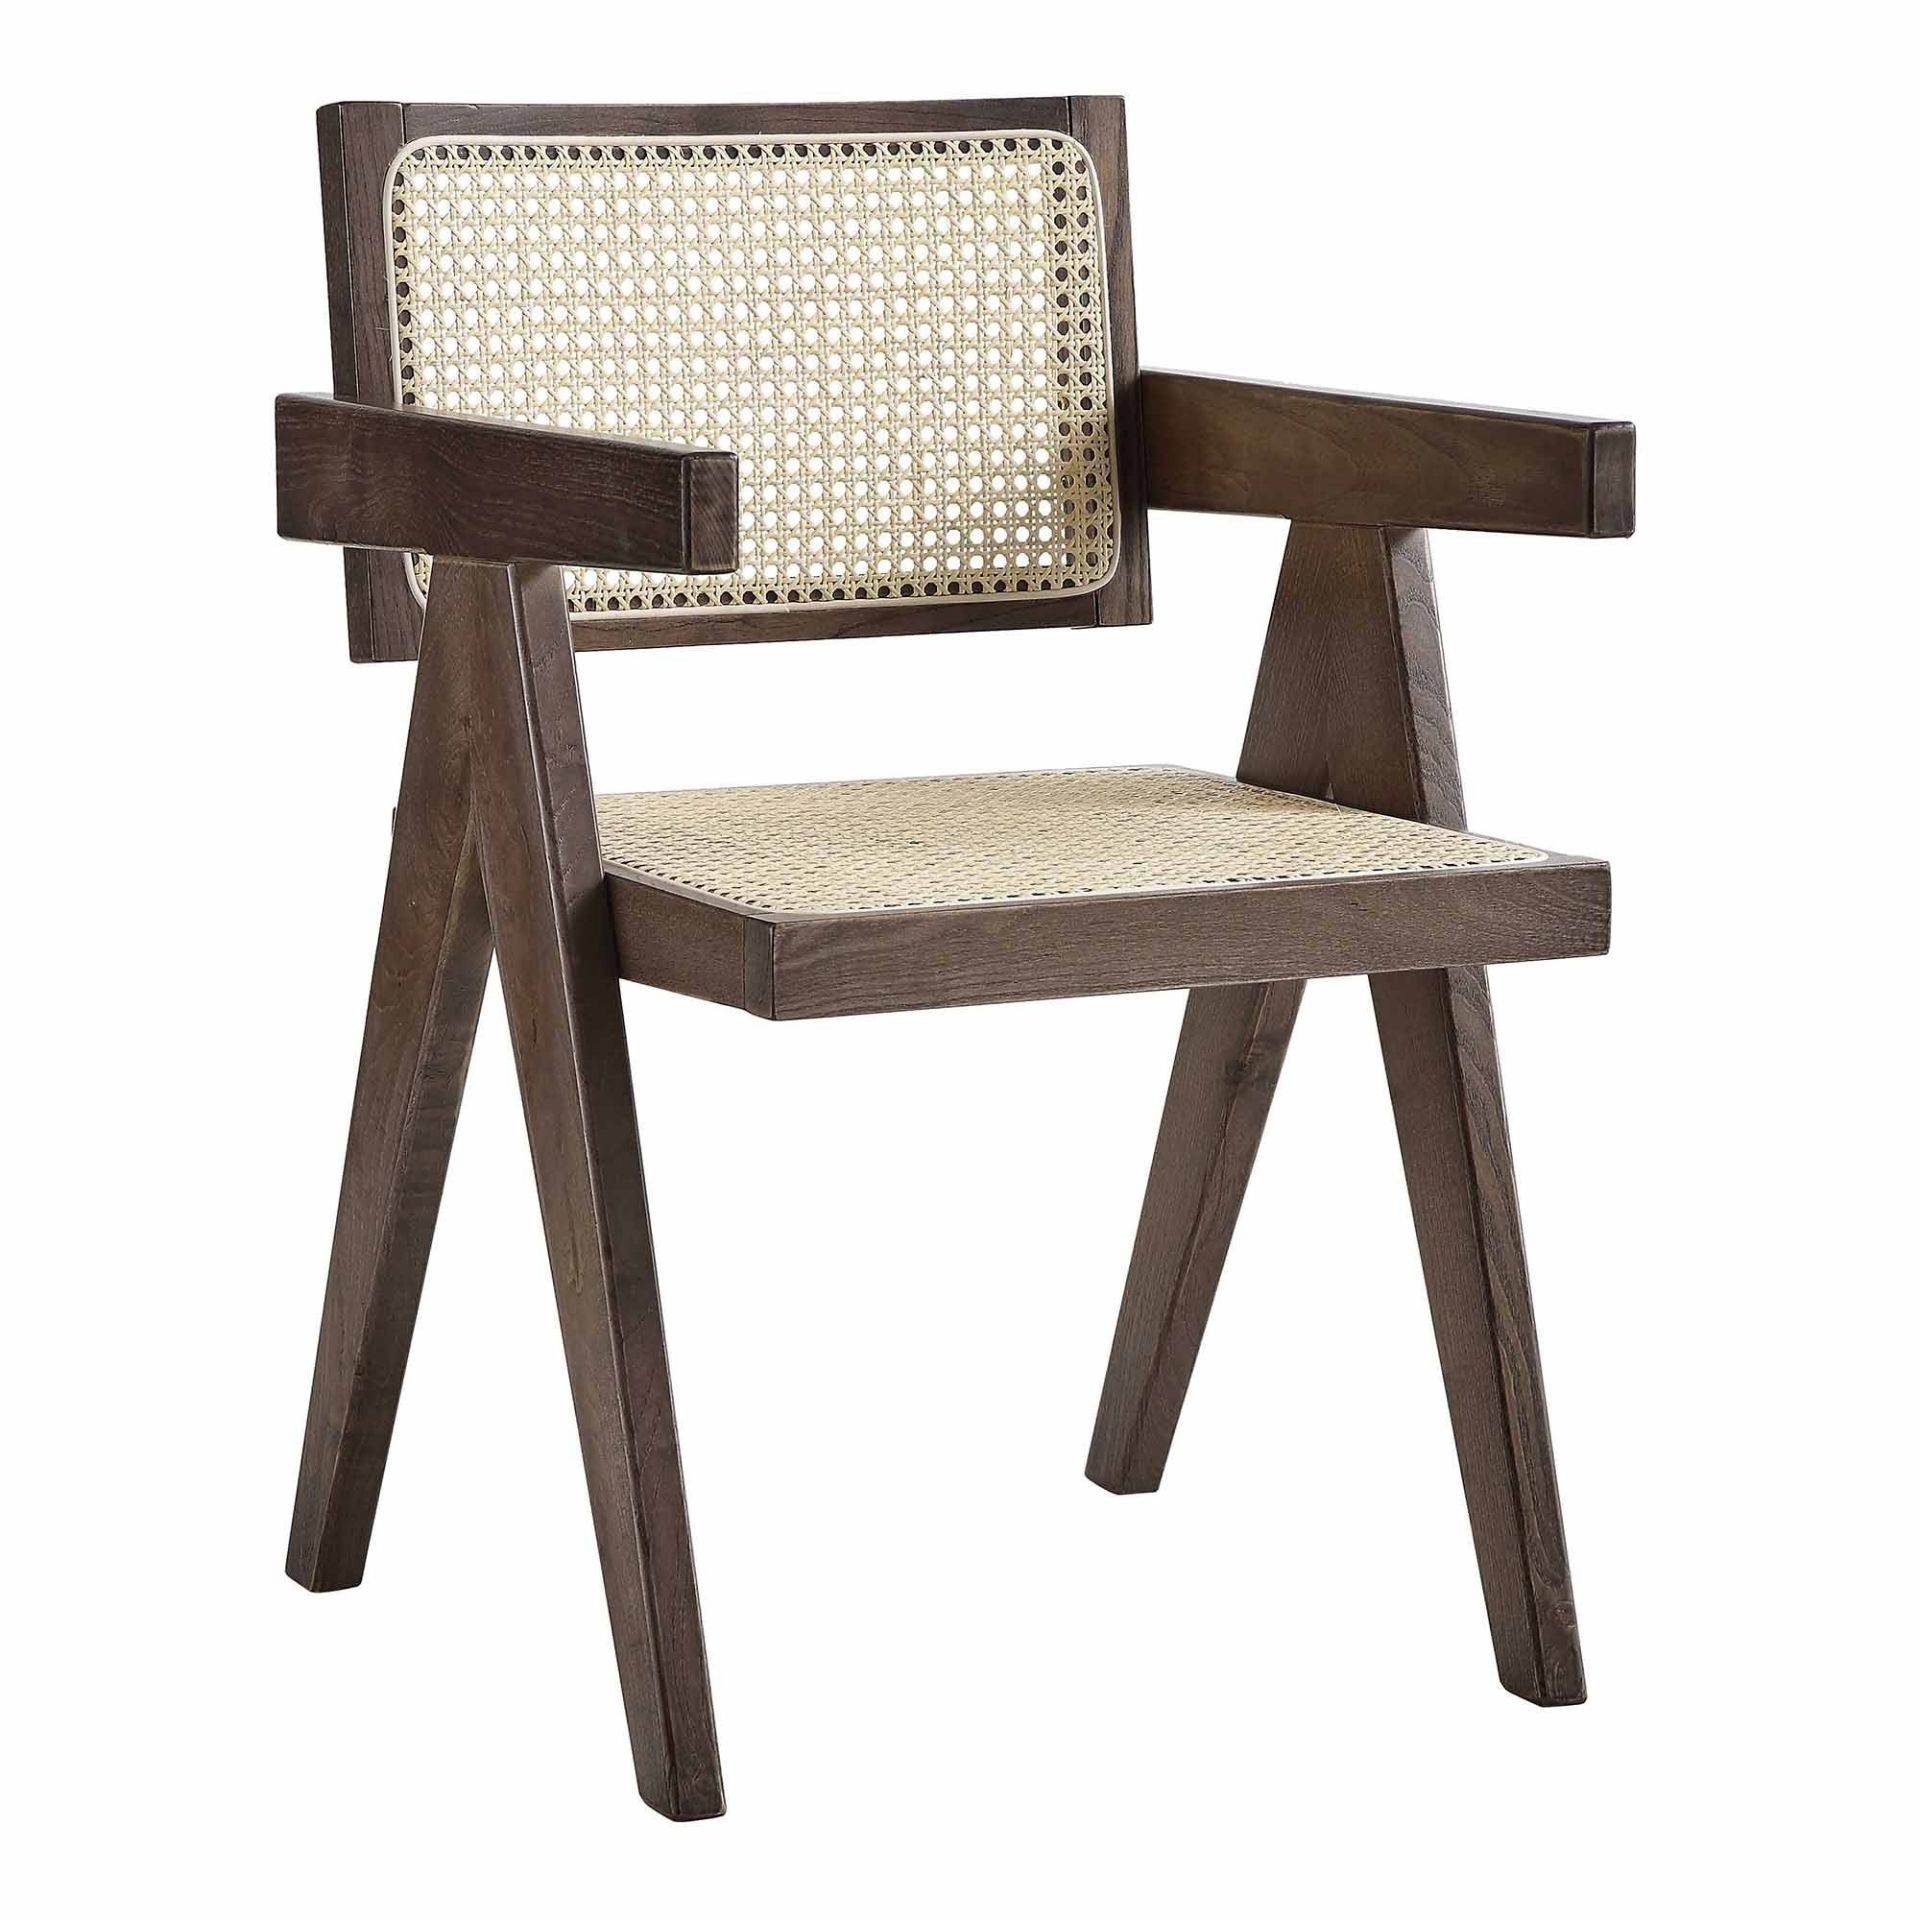 Jeanne Dark Walnut Cane Rattan Solid Beech Wood Dining Chair. - ER25. RRP £239.99. The cane rattan - Image 2 of 2